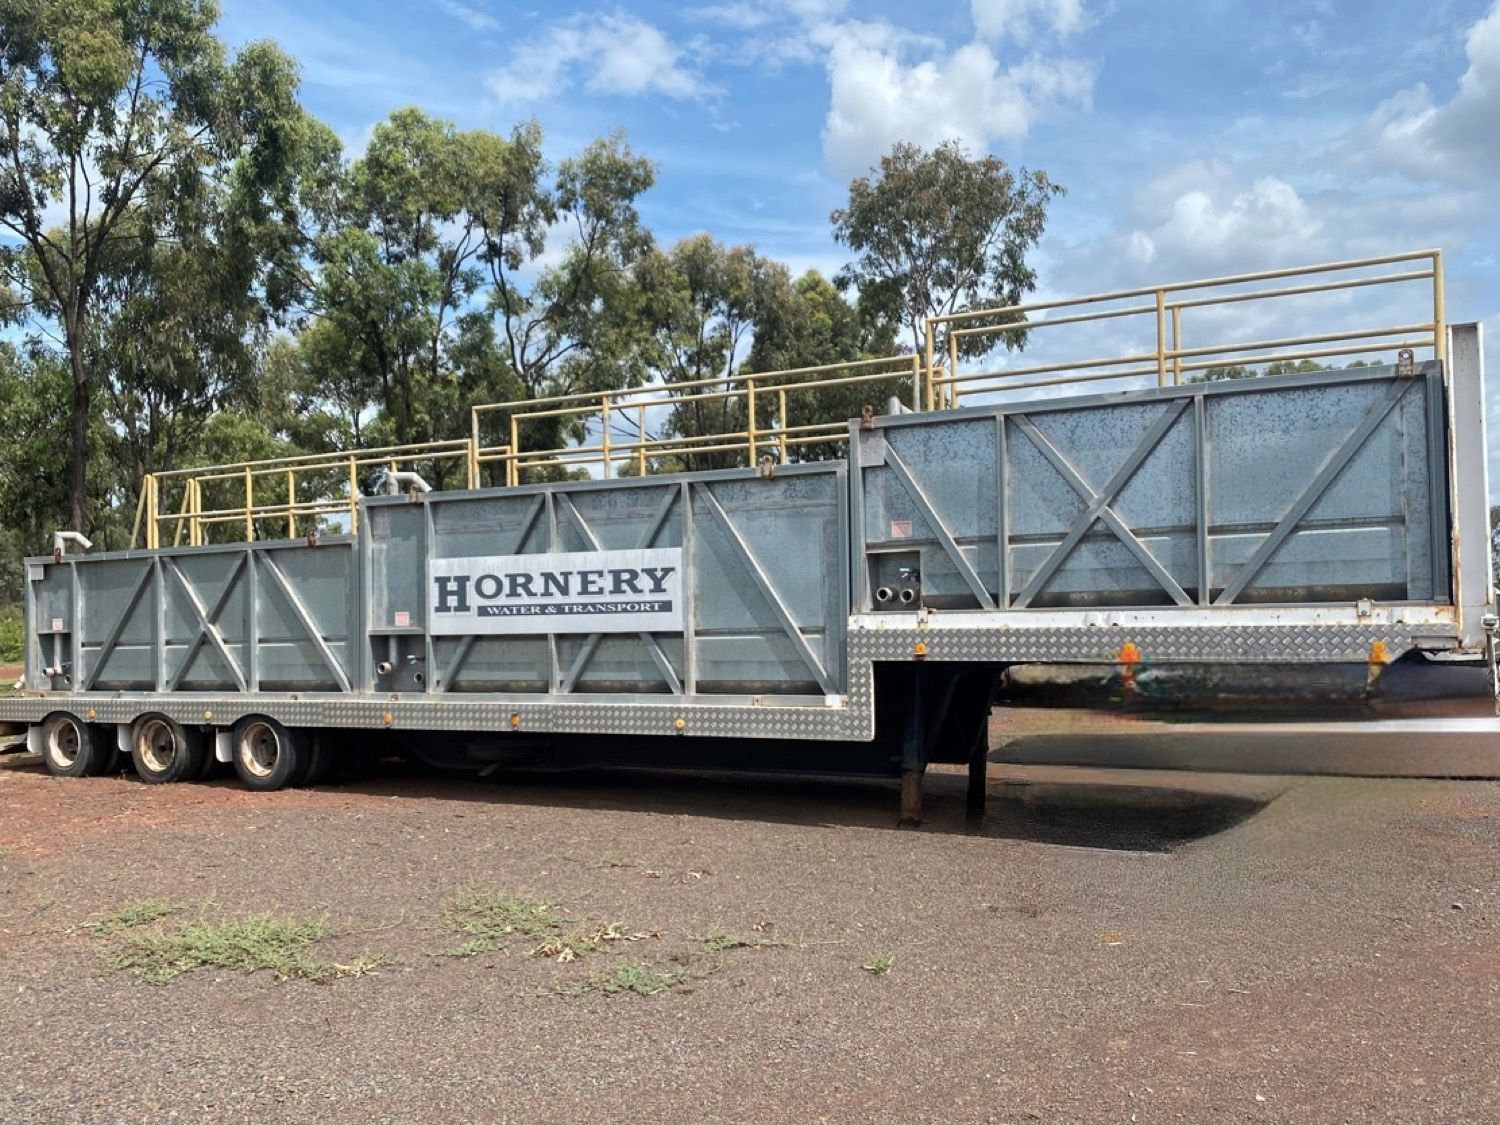 a large trailer with hornery written on it